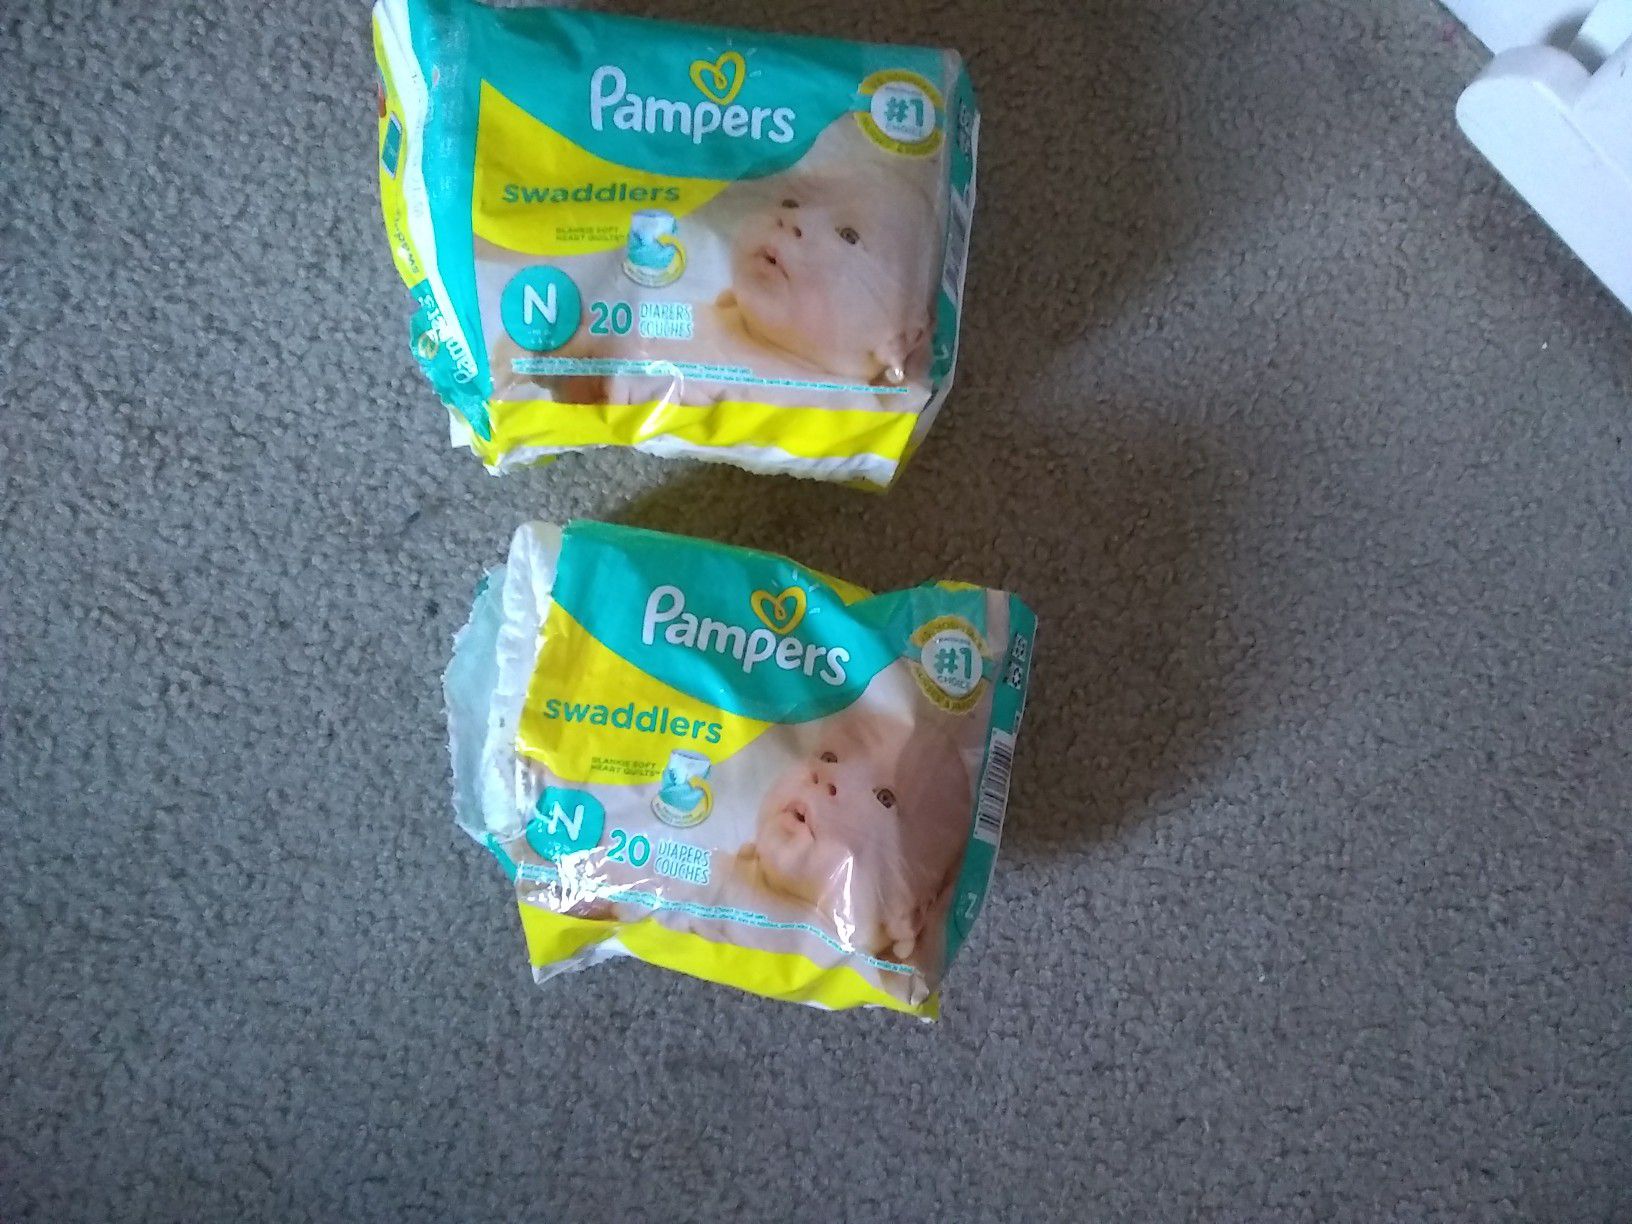 Pampers swaddlers newborn 30 diapers total